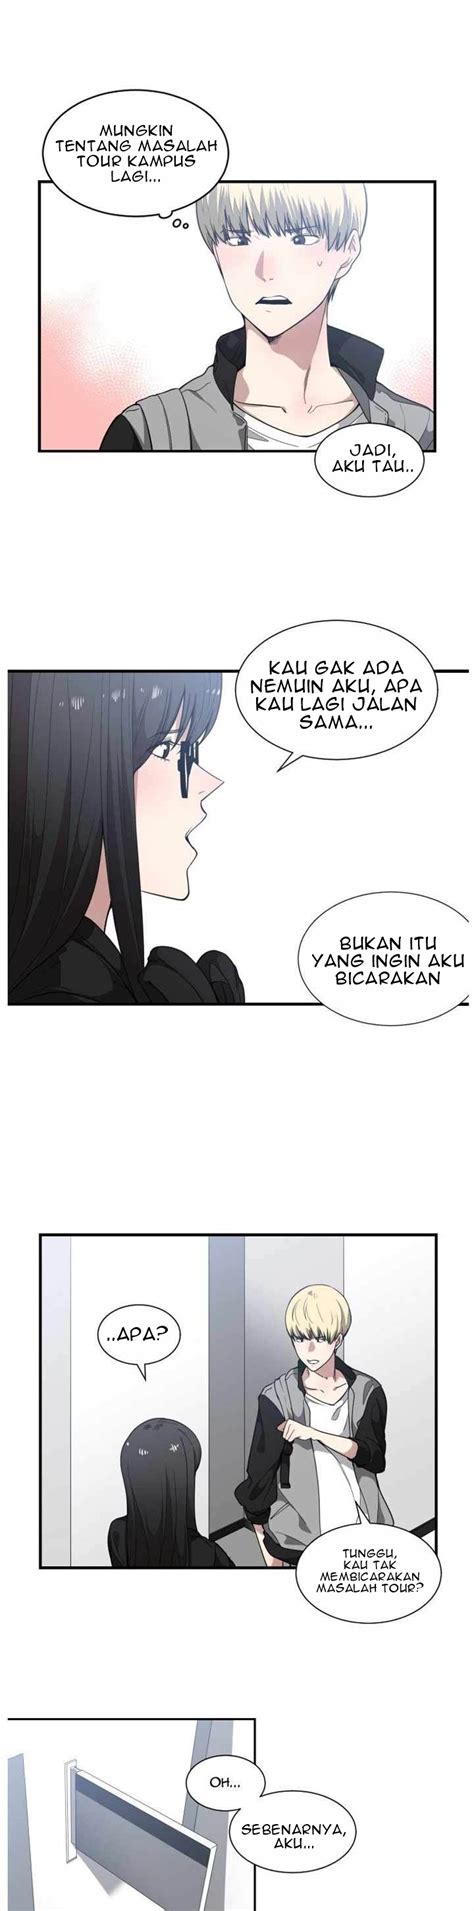 But who would have thought. You're Not That Special! - Chapter 18 - Baca Manga Jepang Sub Indo, Komik Manhwa Korea, Manhua ...